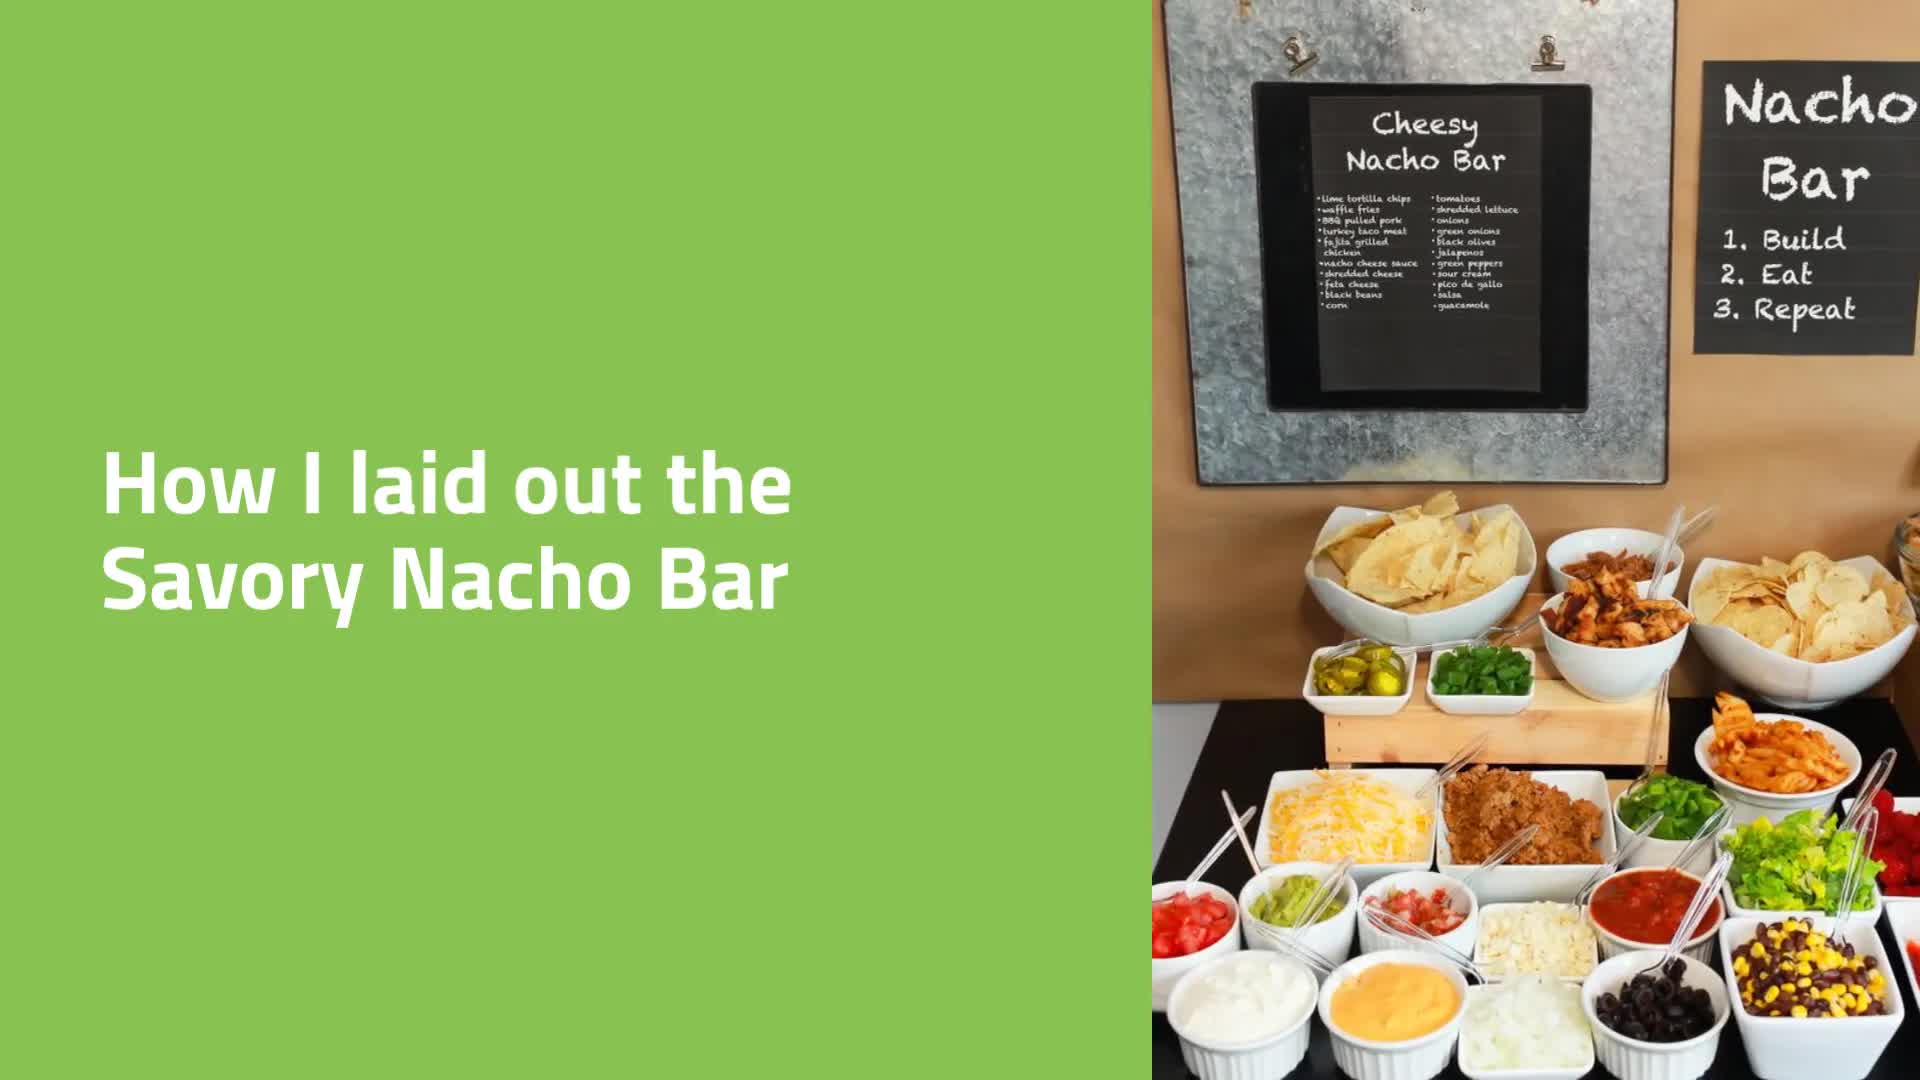 A Make-Your-Own-Nachos Party Buffet